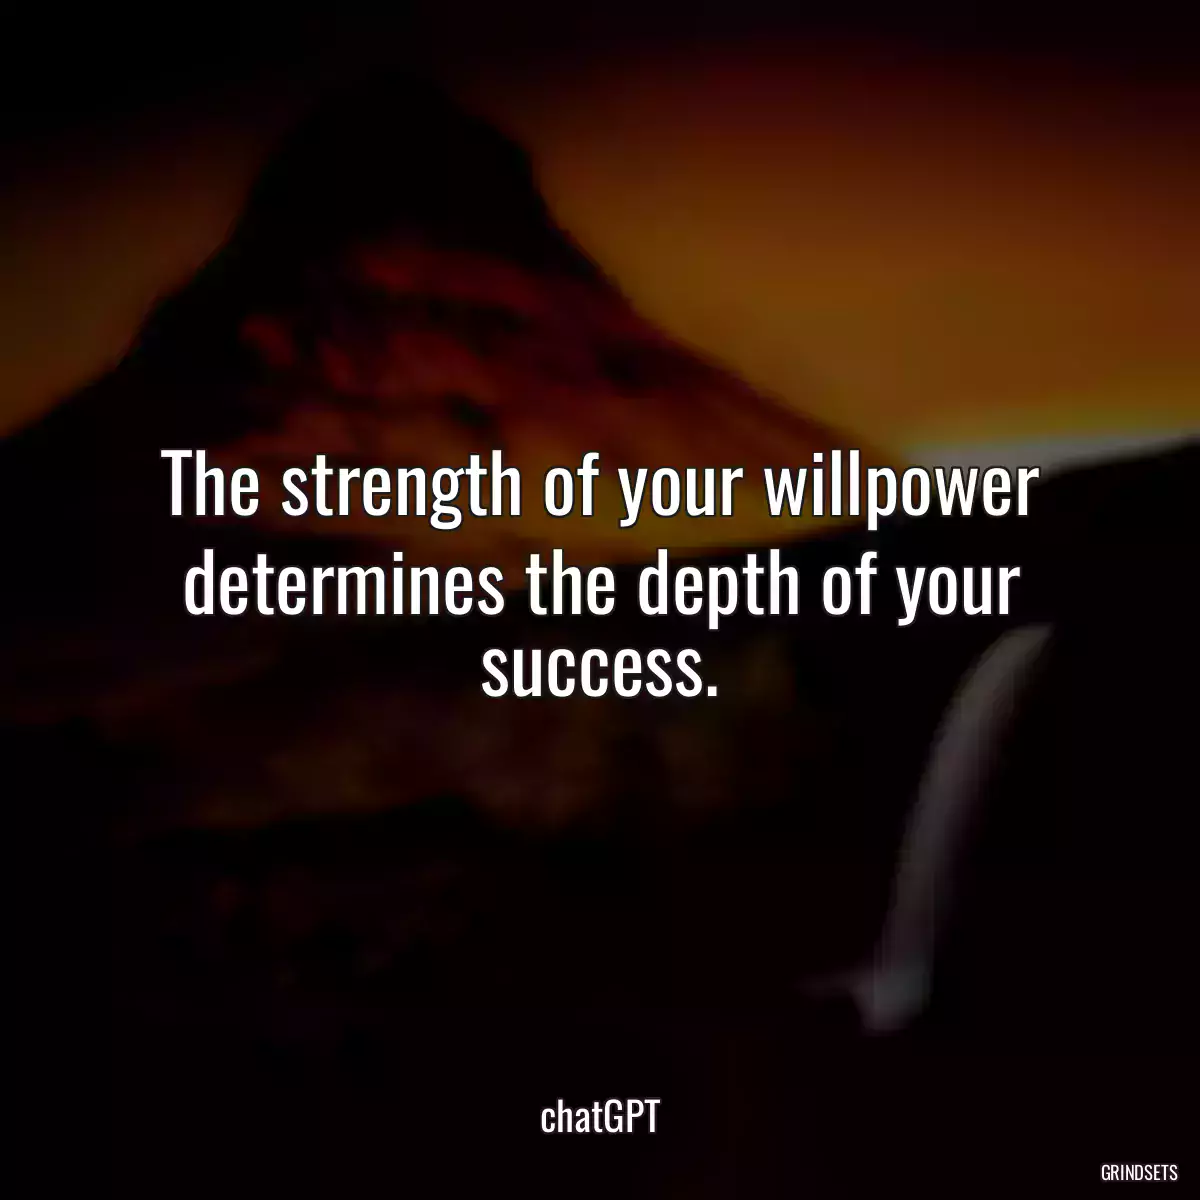 The strength of your willpower determines the depth of your success.